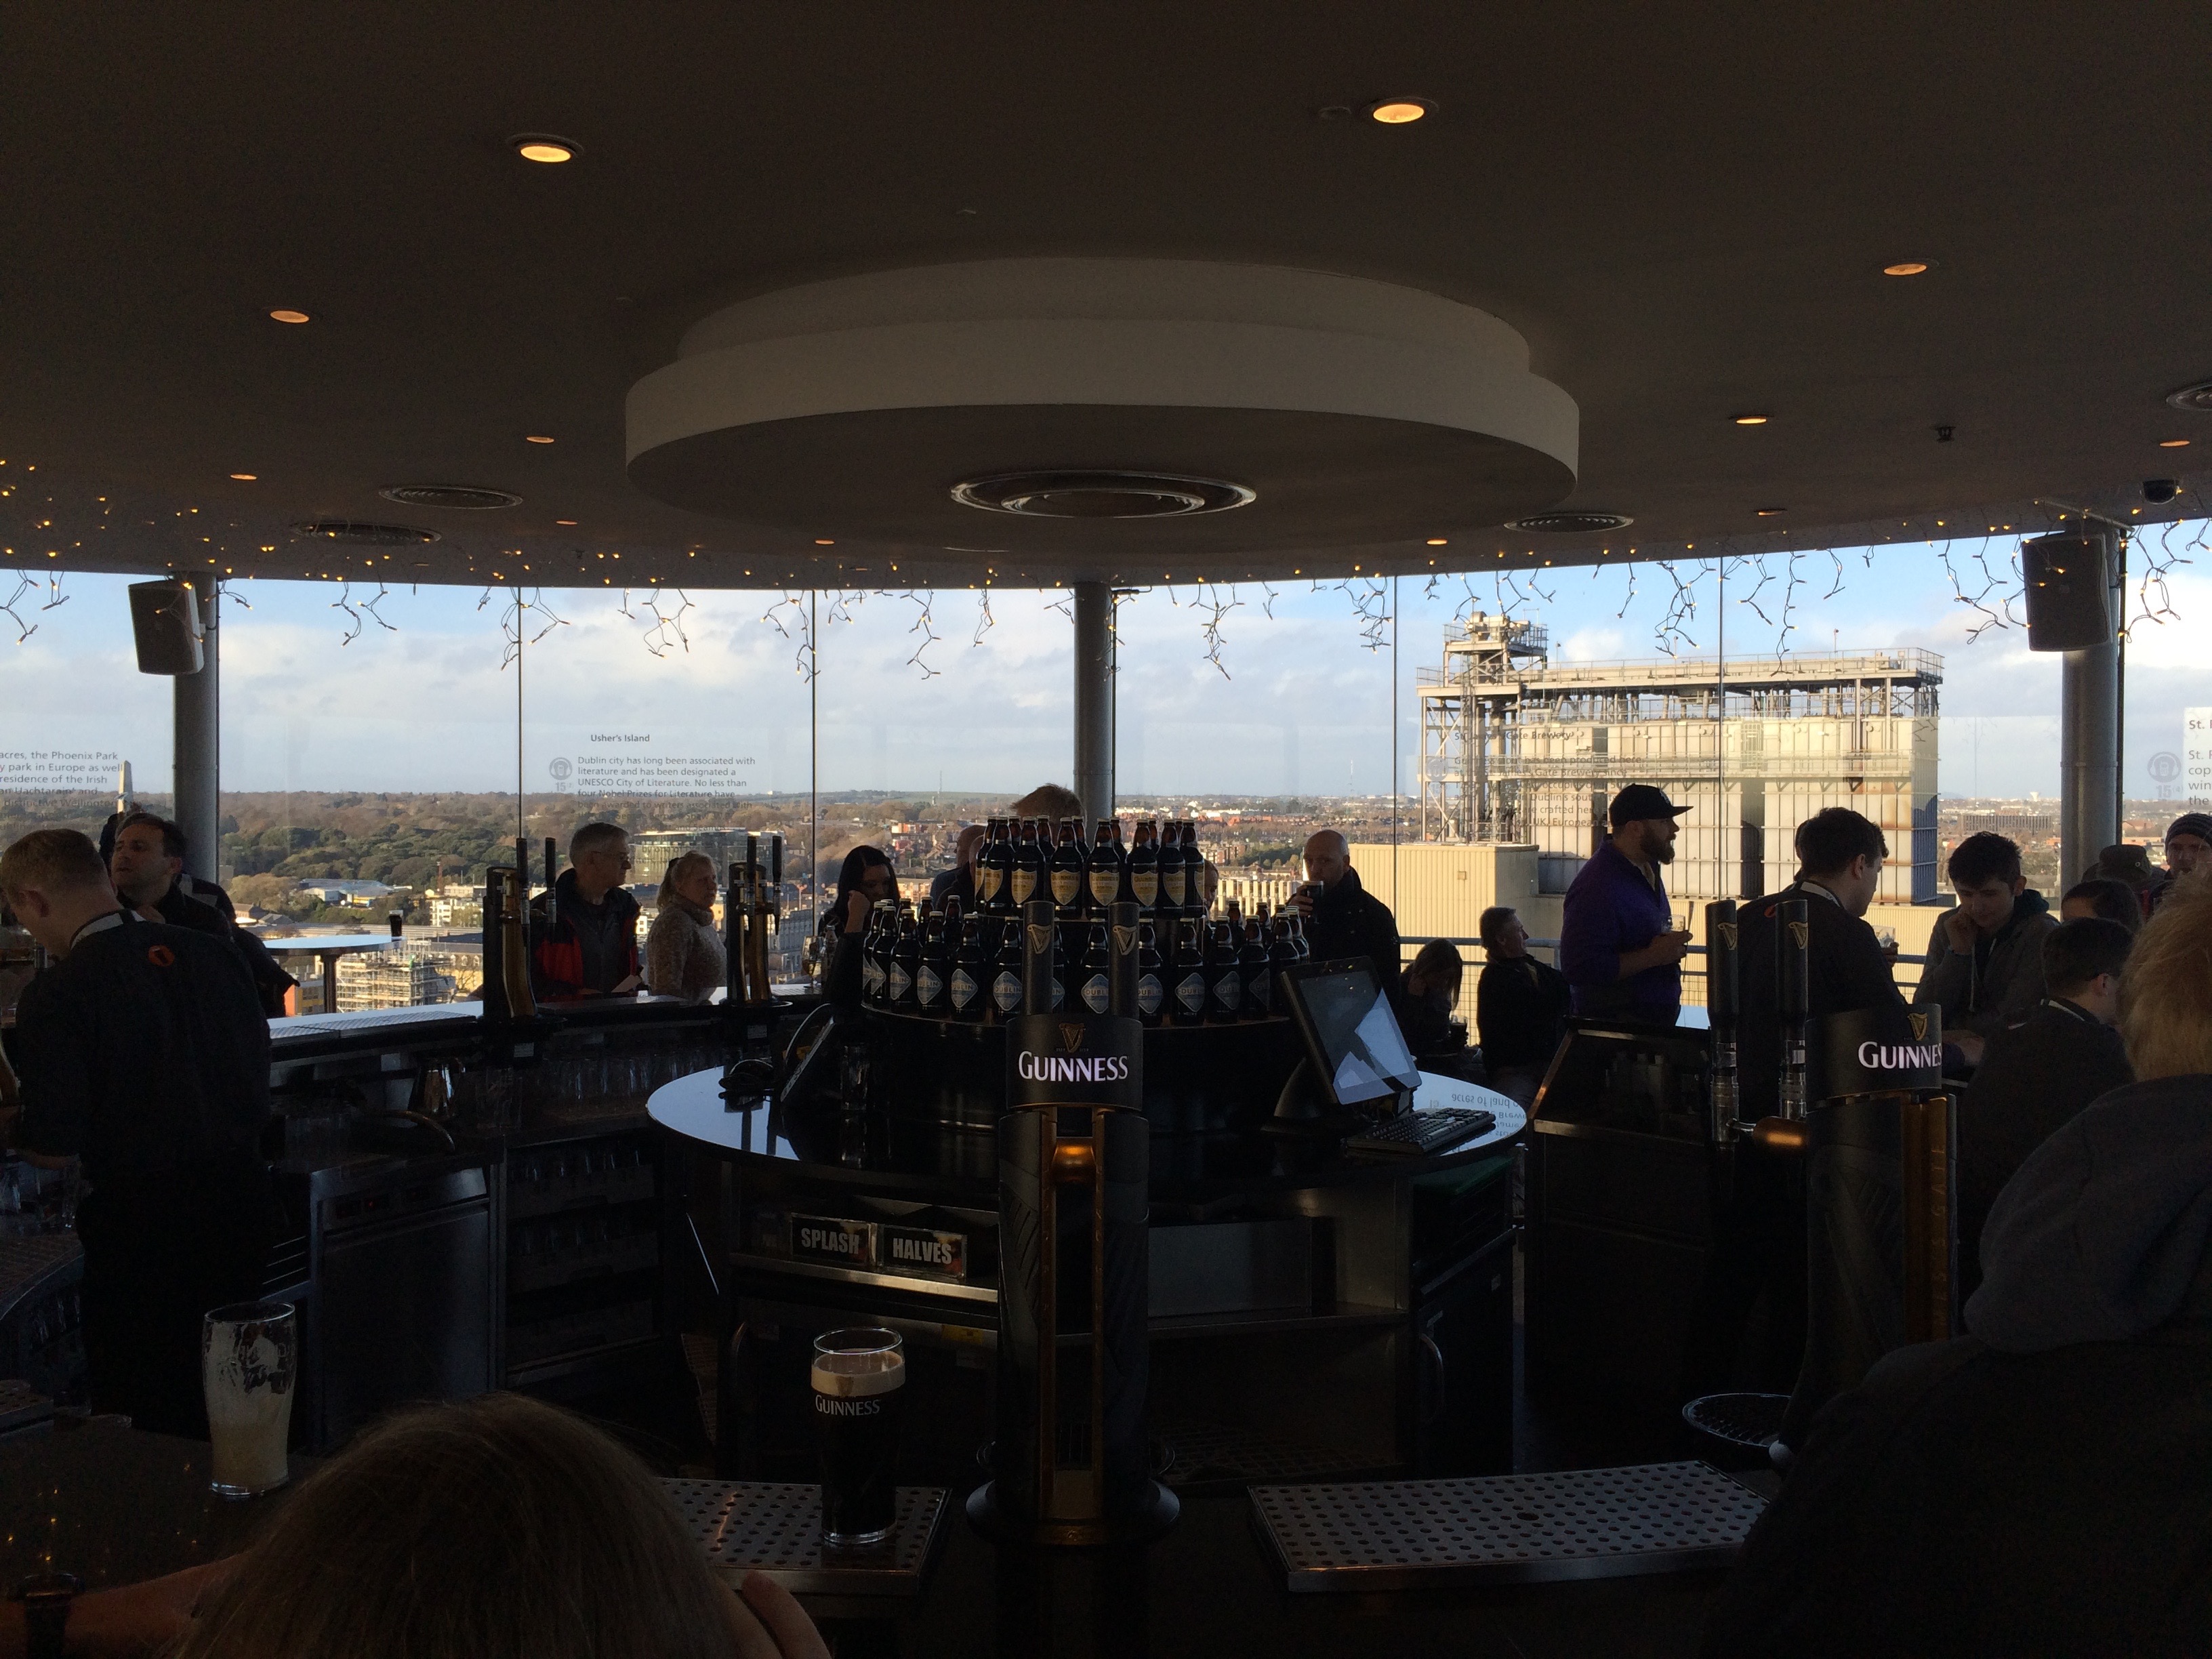 The Gravity Bar atop the Guinness Storehouse.